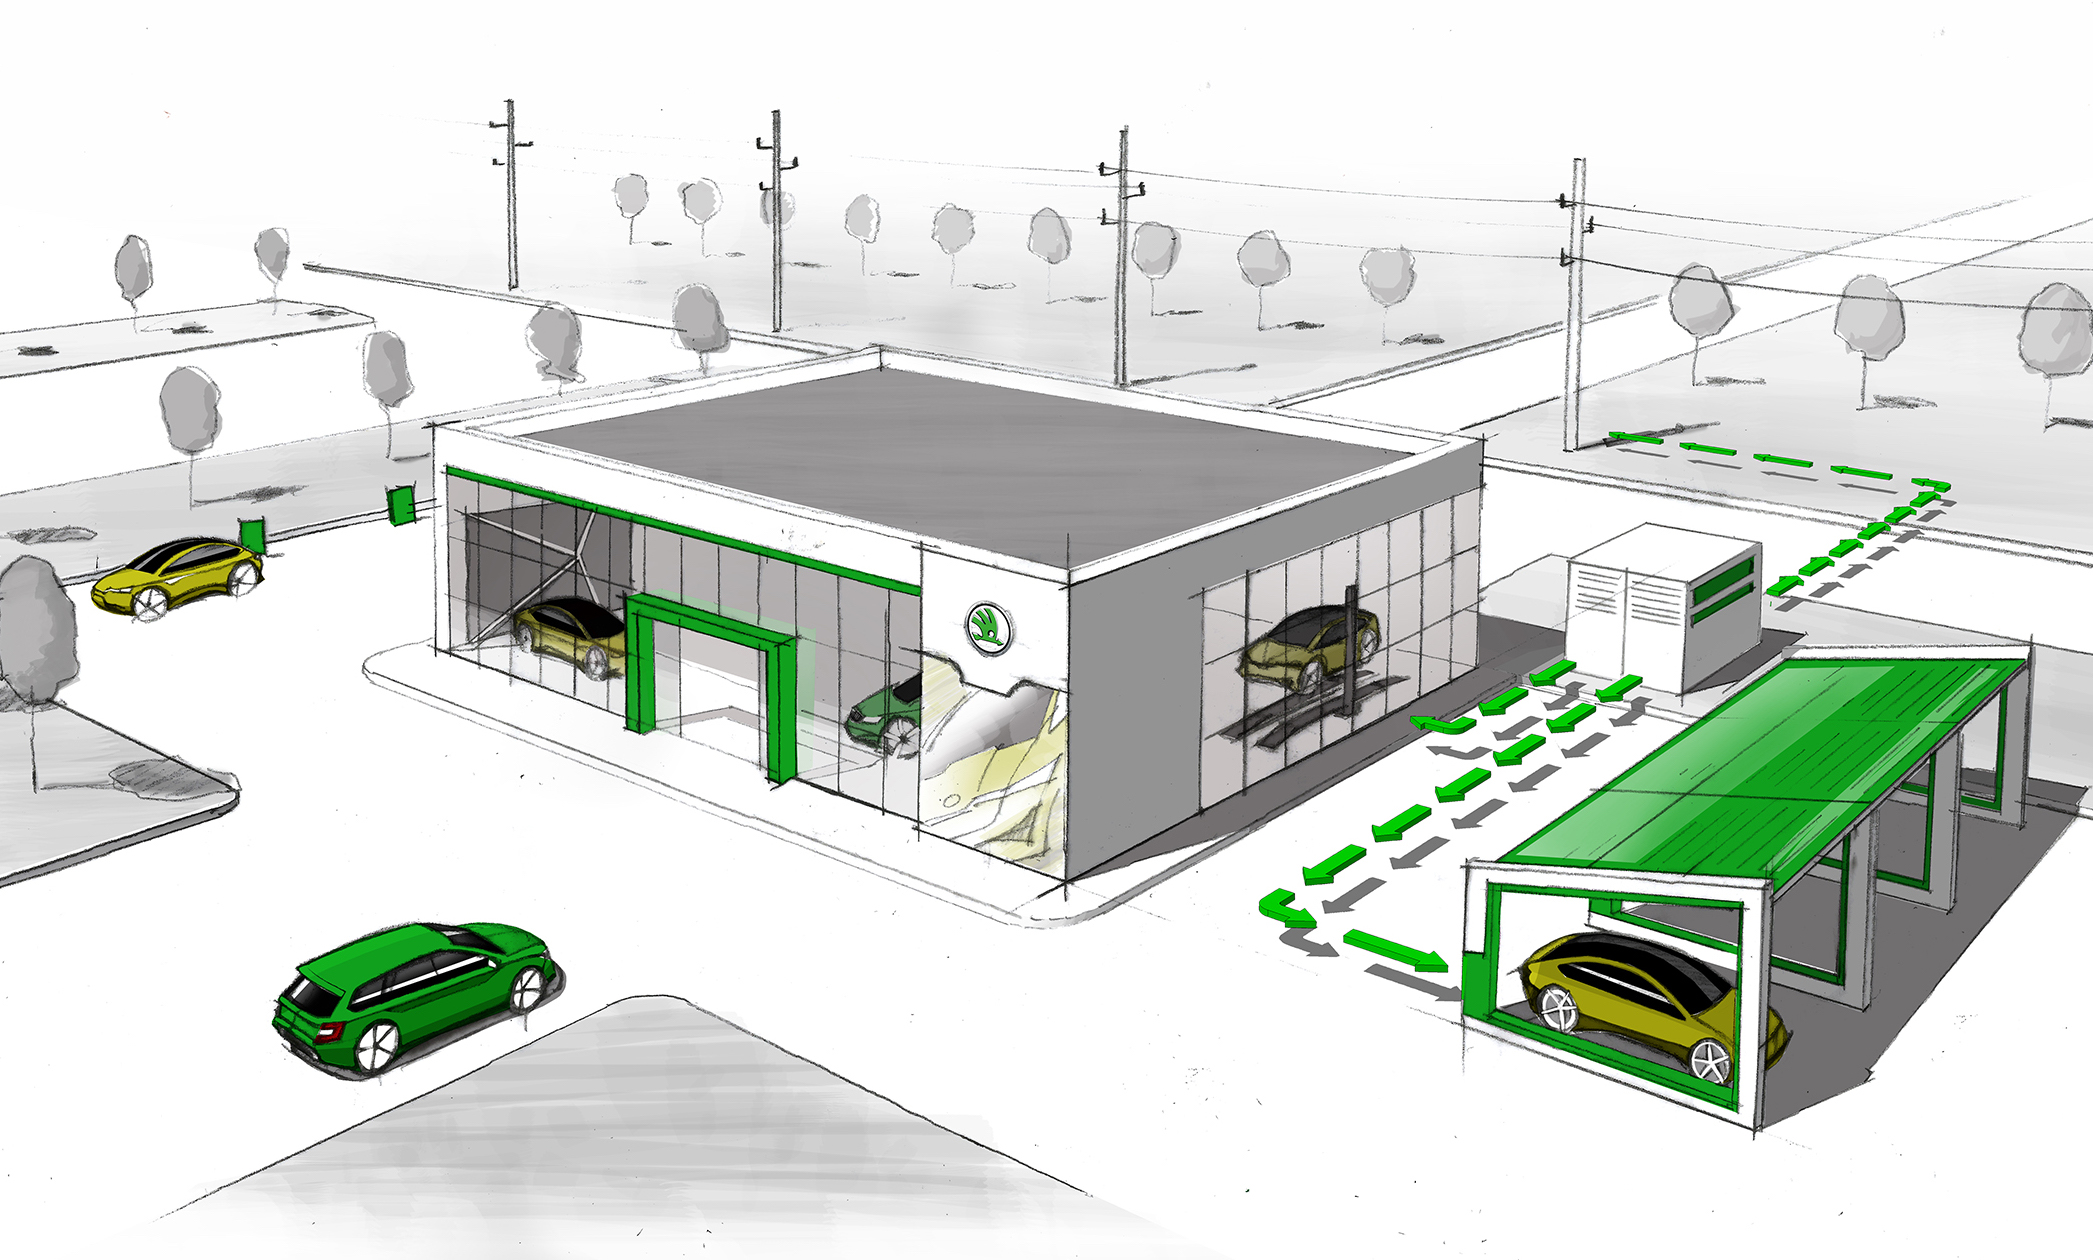 Skoda dealers plug in to secondlife electric car batteries to power